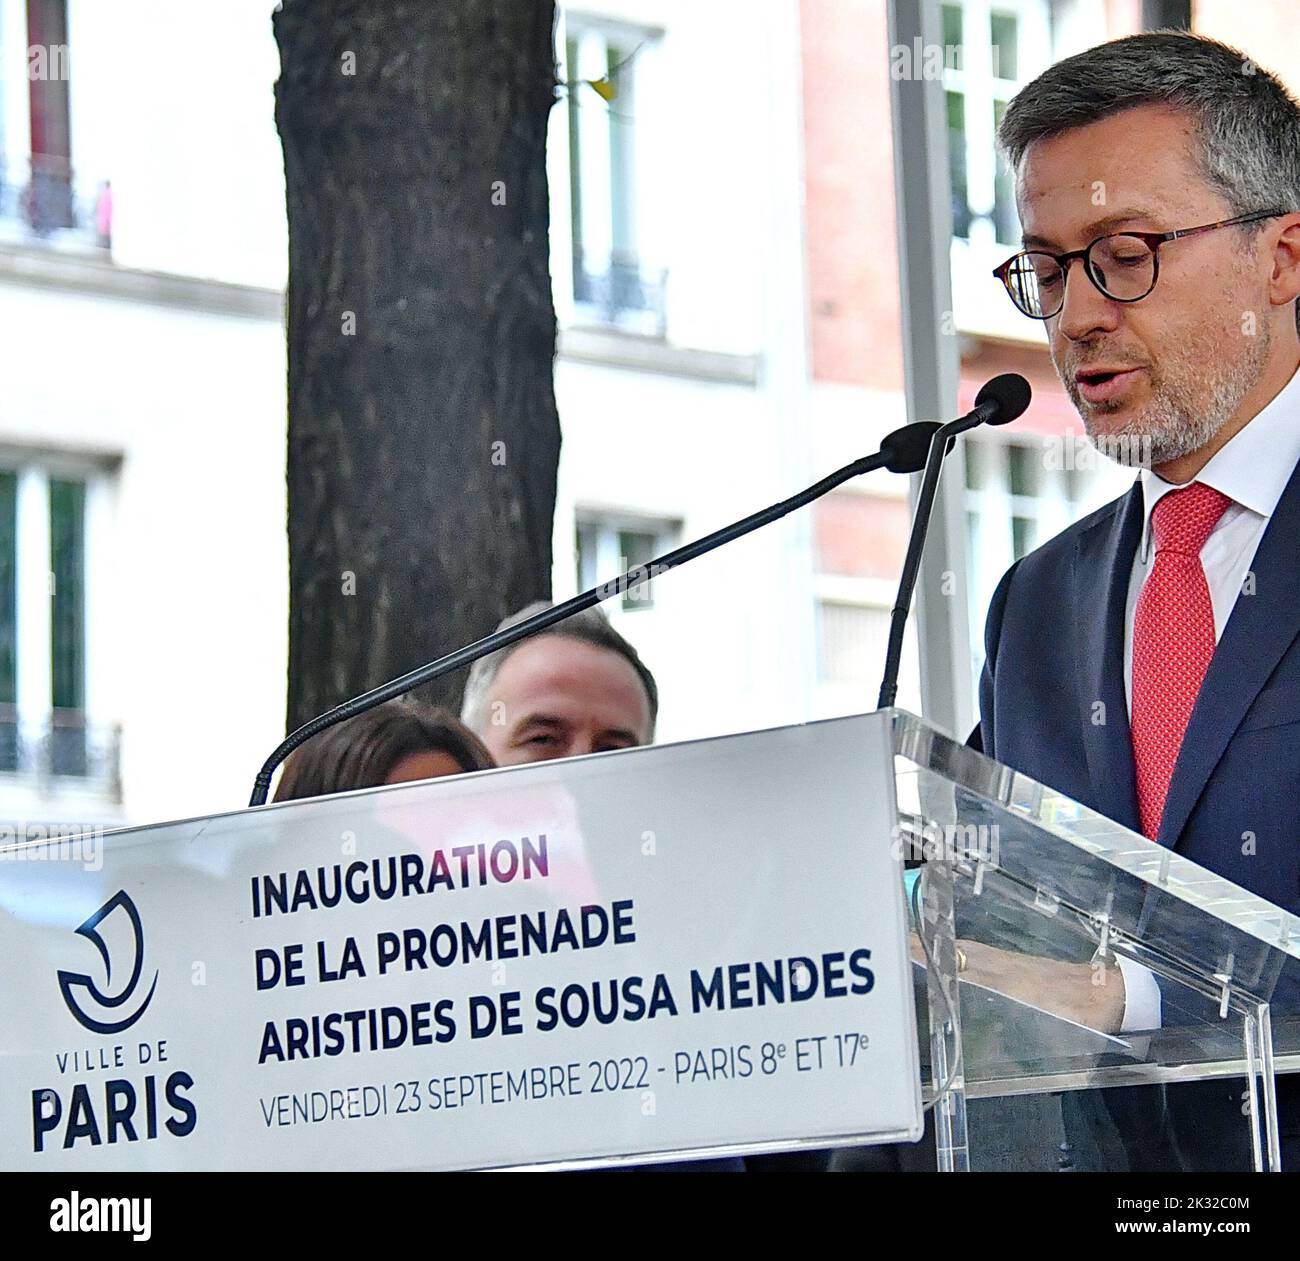 Paris, France. 24th Sep, 2022. Mayor of Lisbon, Carlos Moedas attending the inauguration Of The Sousa Mendes promenade and place, located on the median strip of boulevard des Batignolles in Paris 8th and 17th between place Prosper Goubaux and rue Andrieux, in Paris, France, on September 23, 2022. Hero of the World War II, Aristides Sousa Mendes, Portuguese diplomat stationed in Bordeaux during the French debacle of 1940, refuses to follow the orders of the Portuguese government of Salazar and indiscriminately issues several thousand visas to threatened people wishing to flee France. Photo by K Stock Photo